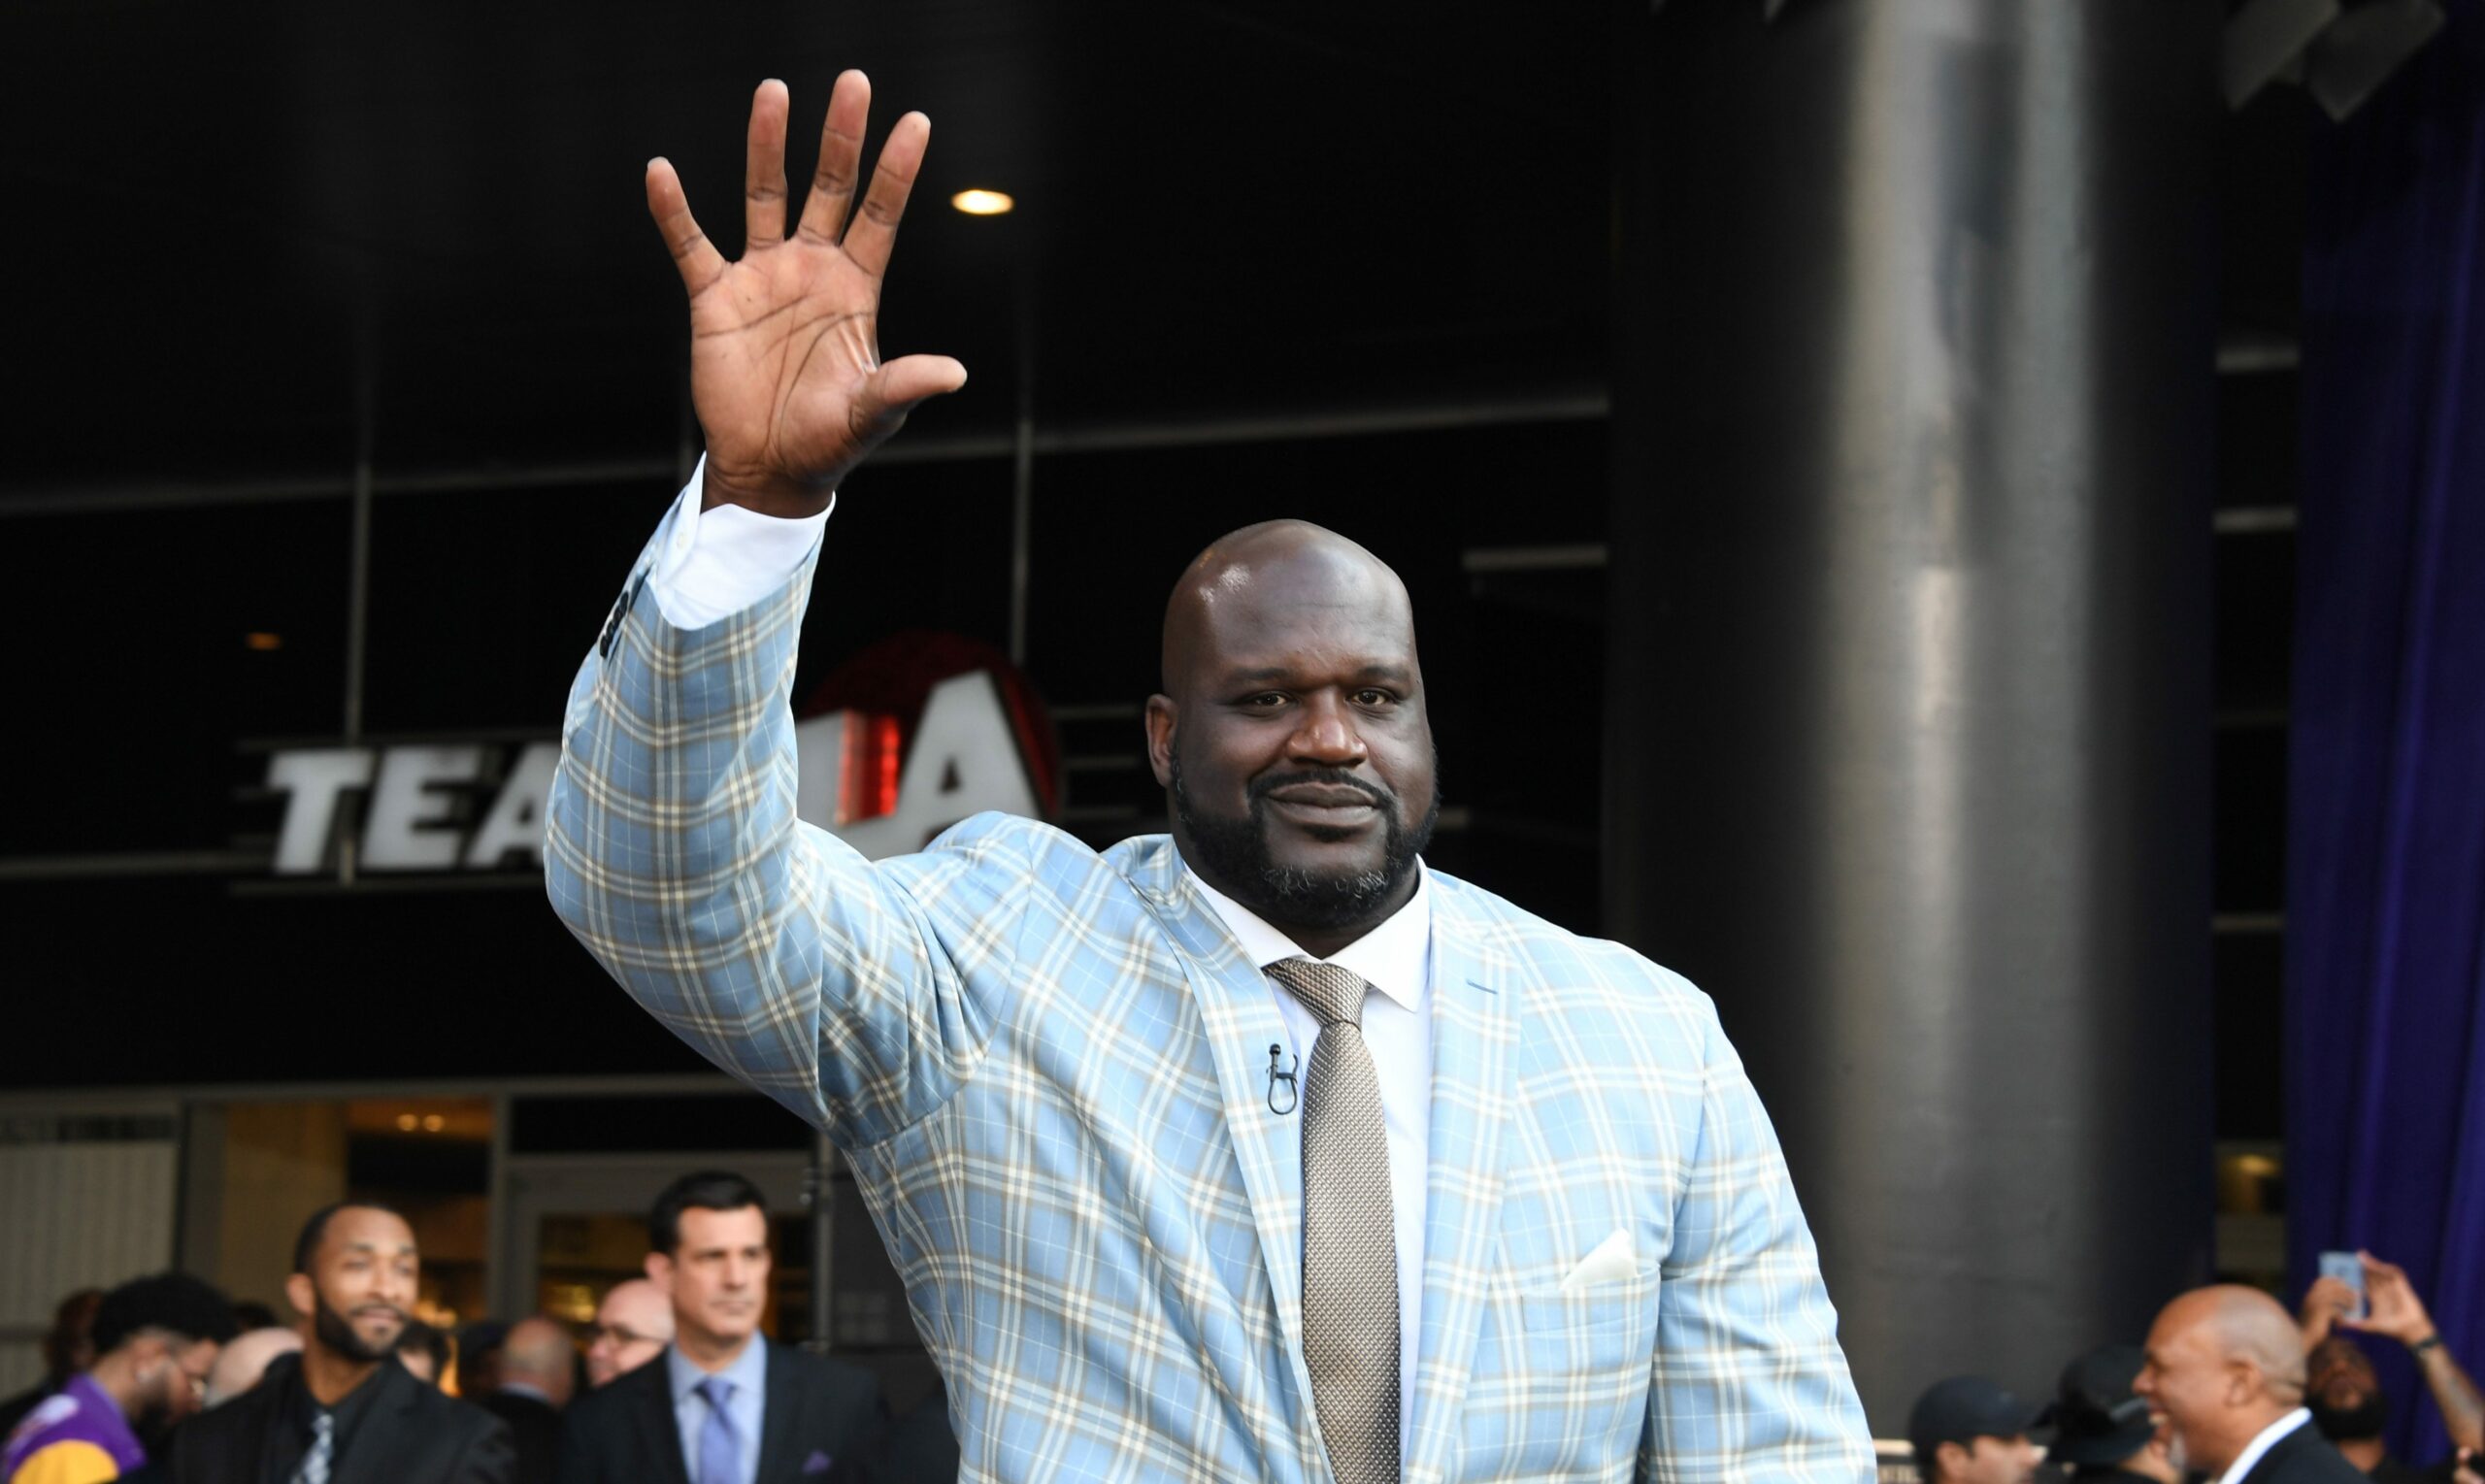 Watch: Trailer for upcoming HBO documentary on Shaquille O’Neal